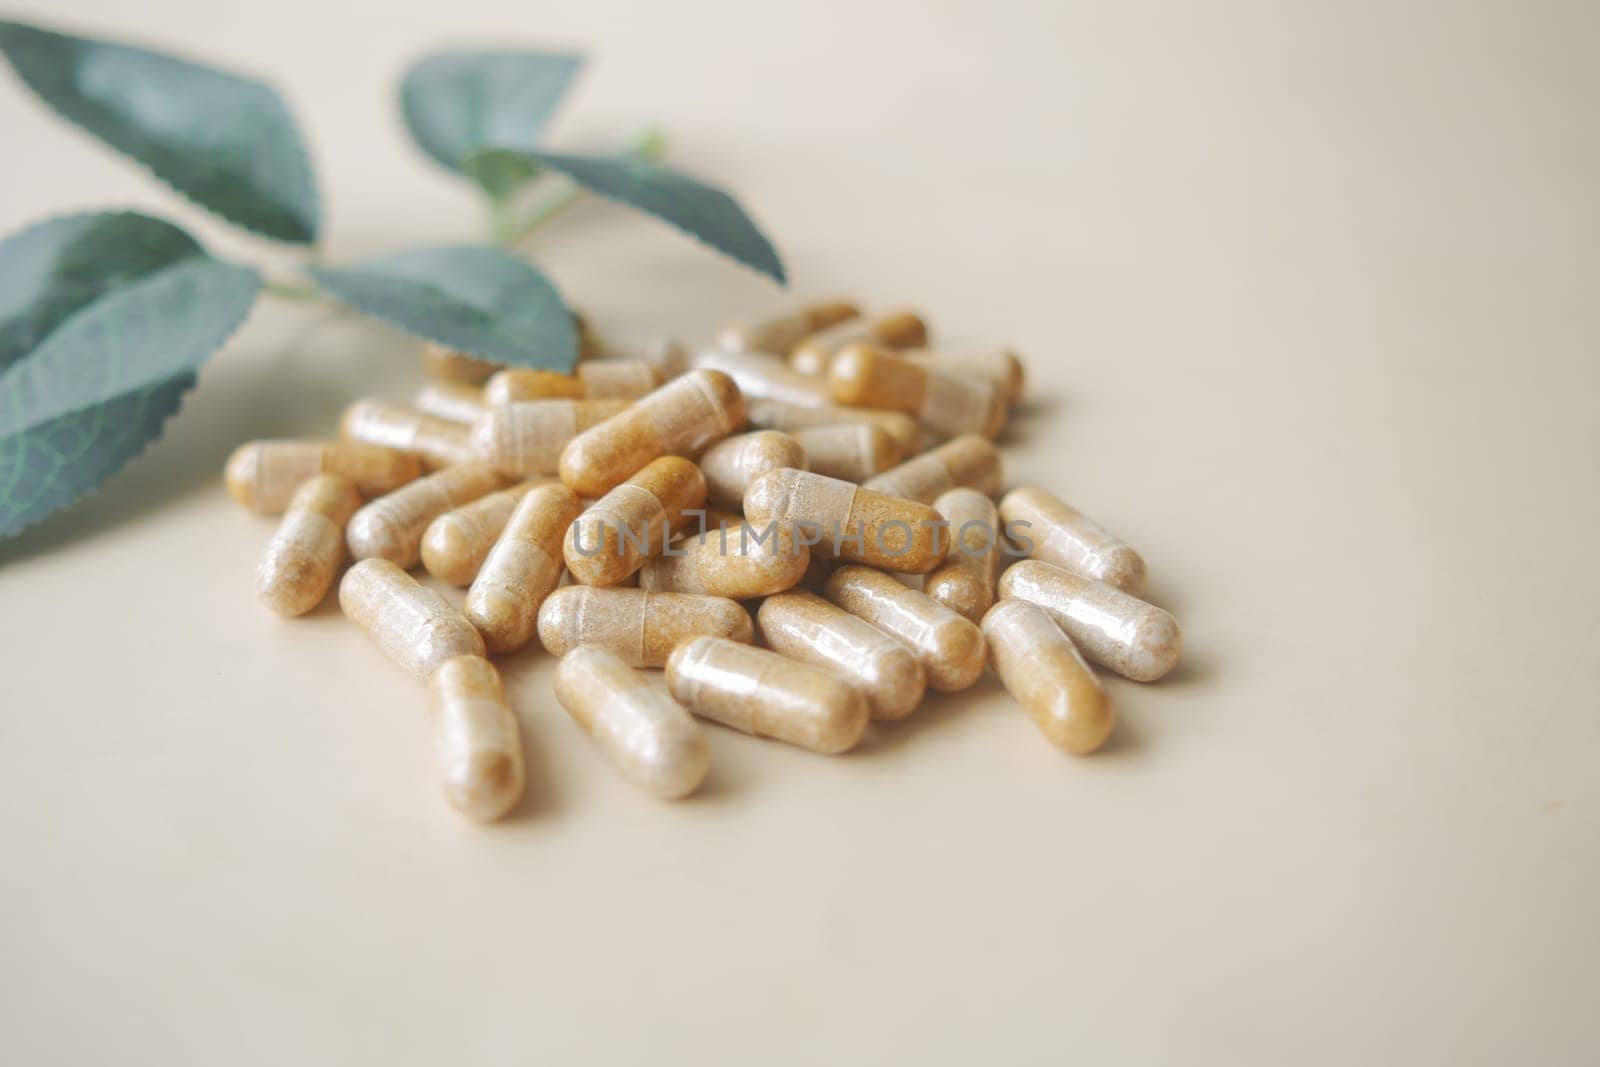 herbal medicine capsules on light color background .